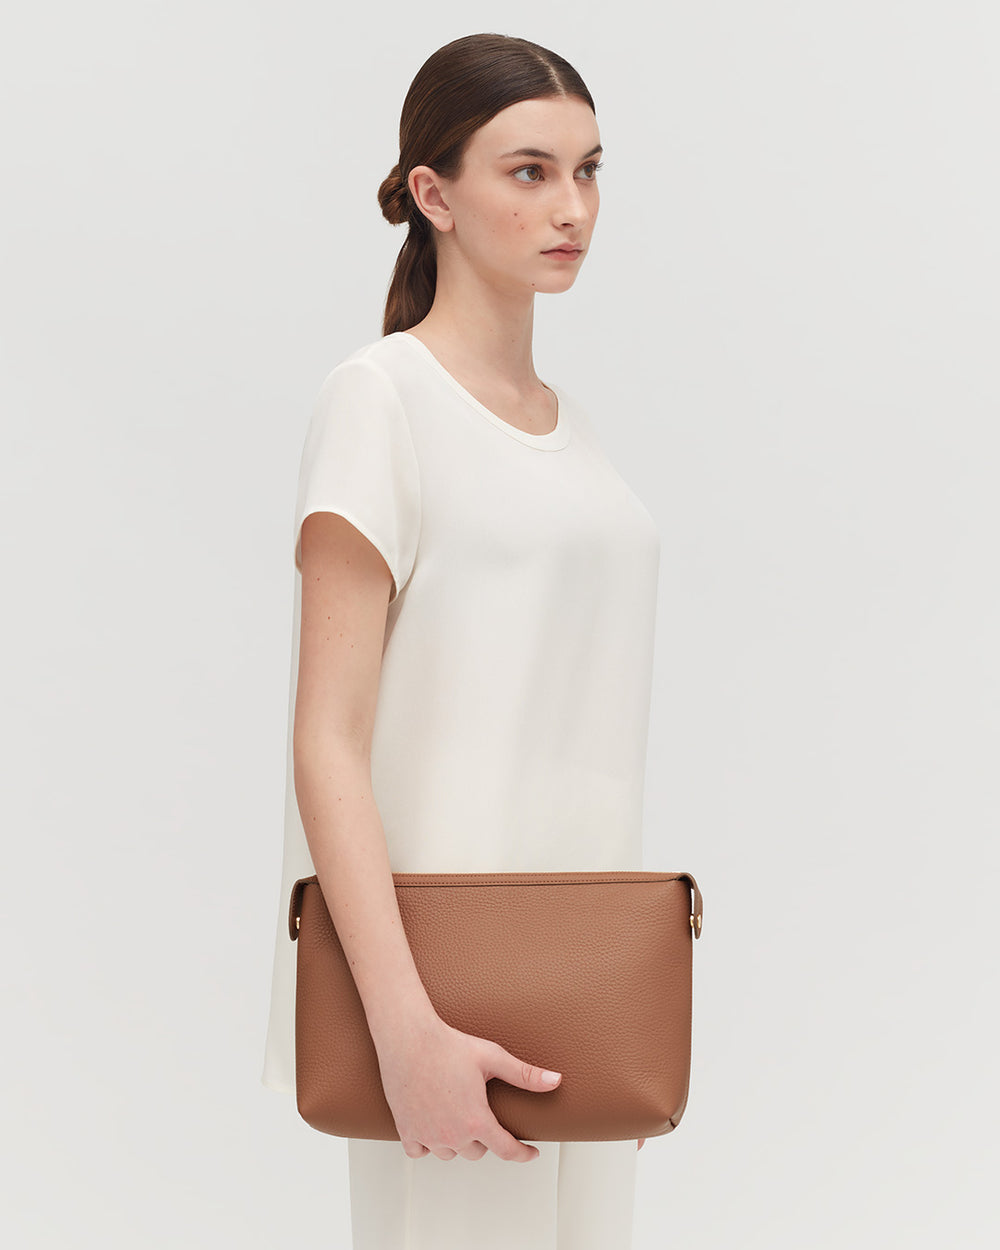 Woman standing with a shoulder bag, facing sideways, looking forward.